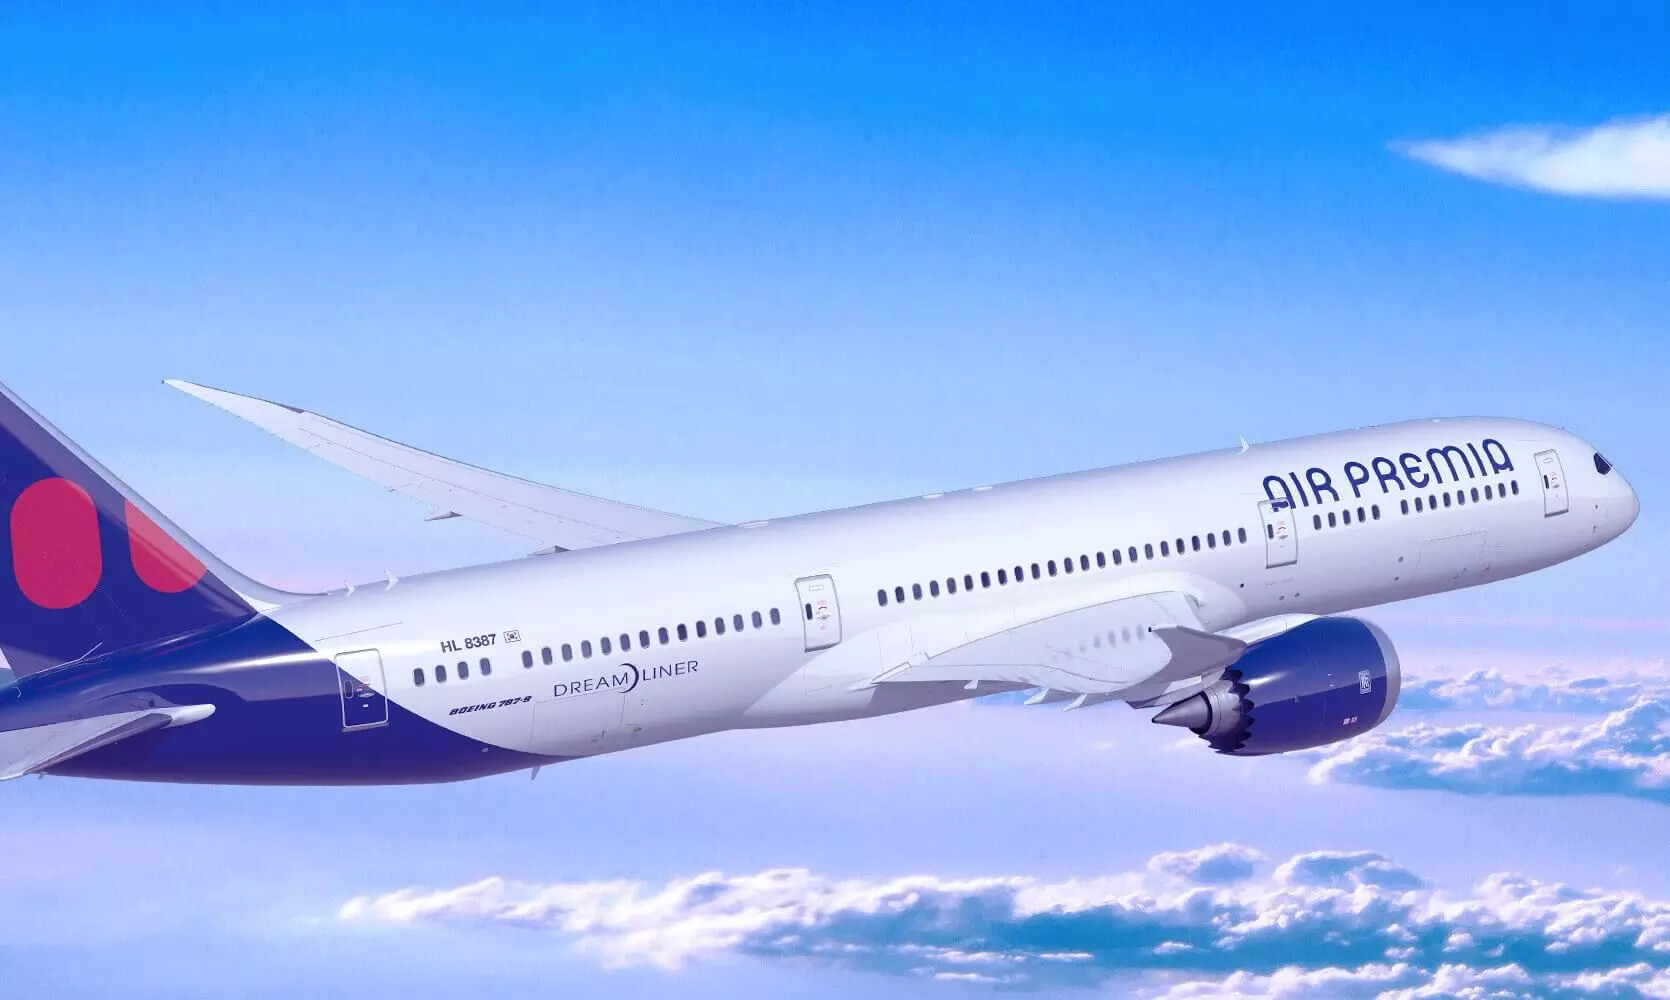 Air Premia to expand network to Americas, Europe with 4 more B787-9s